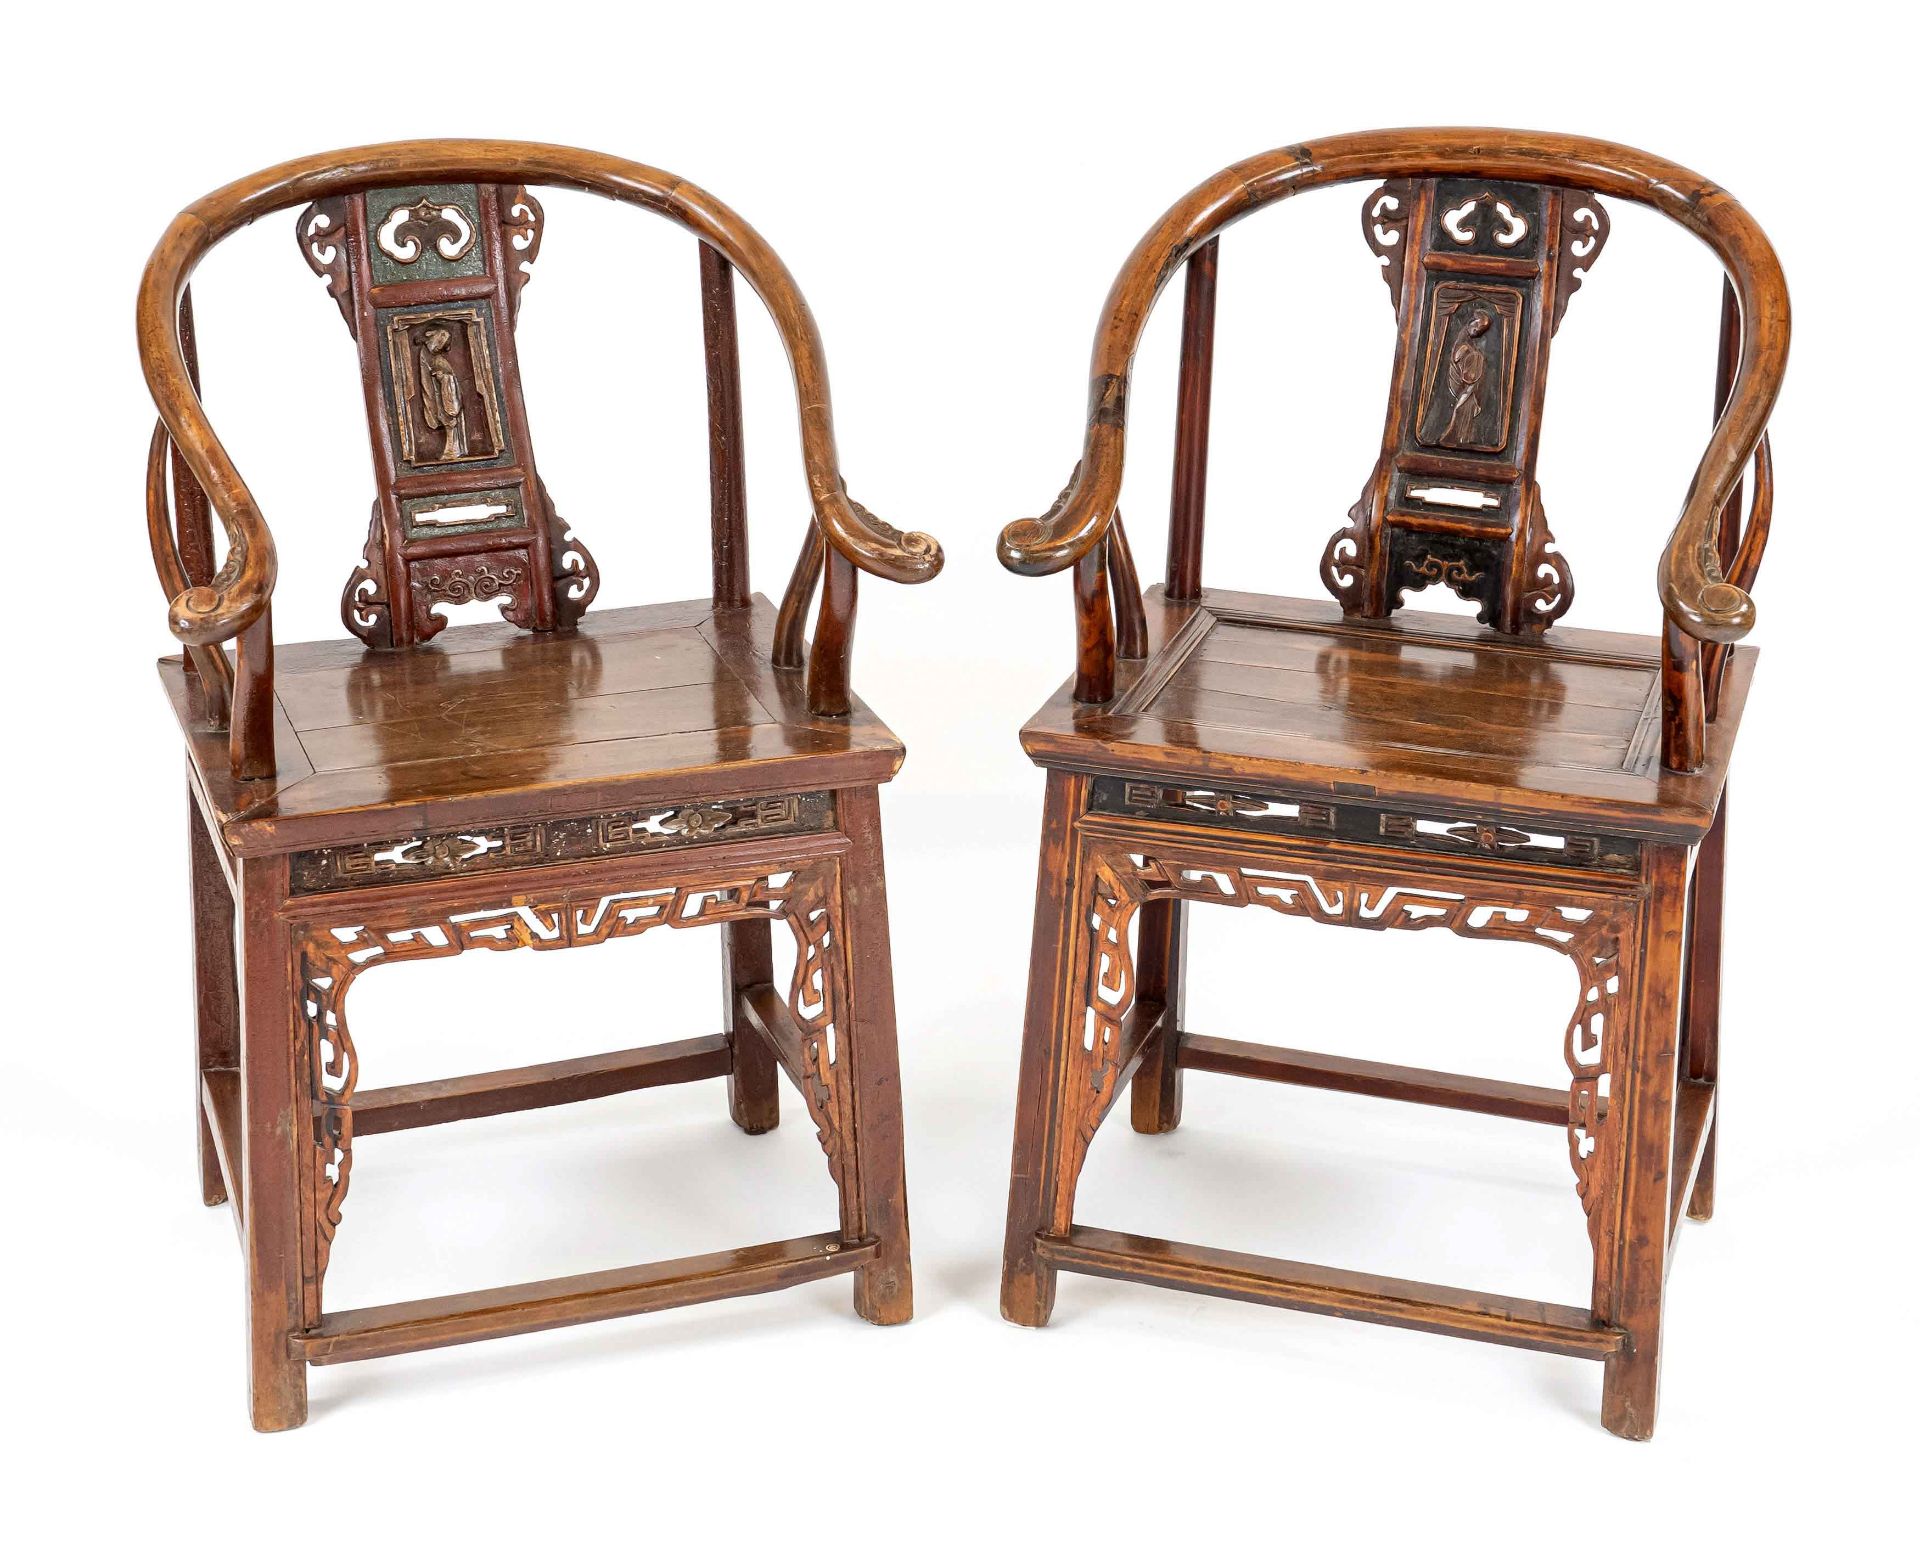 Pair of Chinese armchairs, 19th century, wetwood-like solid wood, typical carving, 88 x 55 x 43 cm